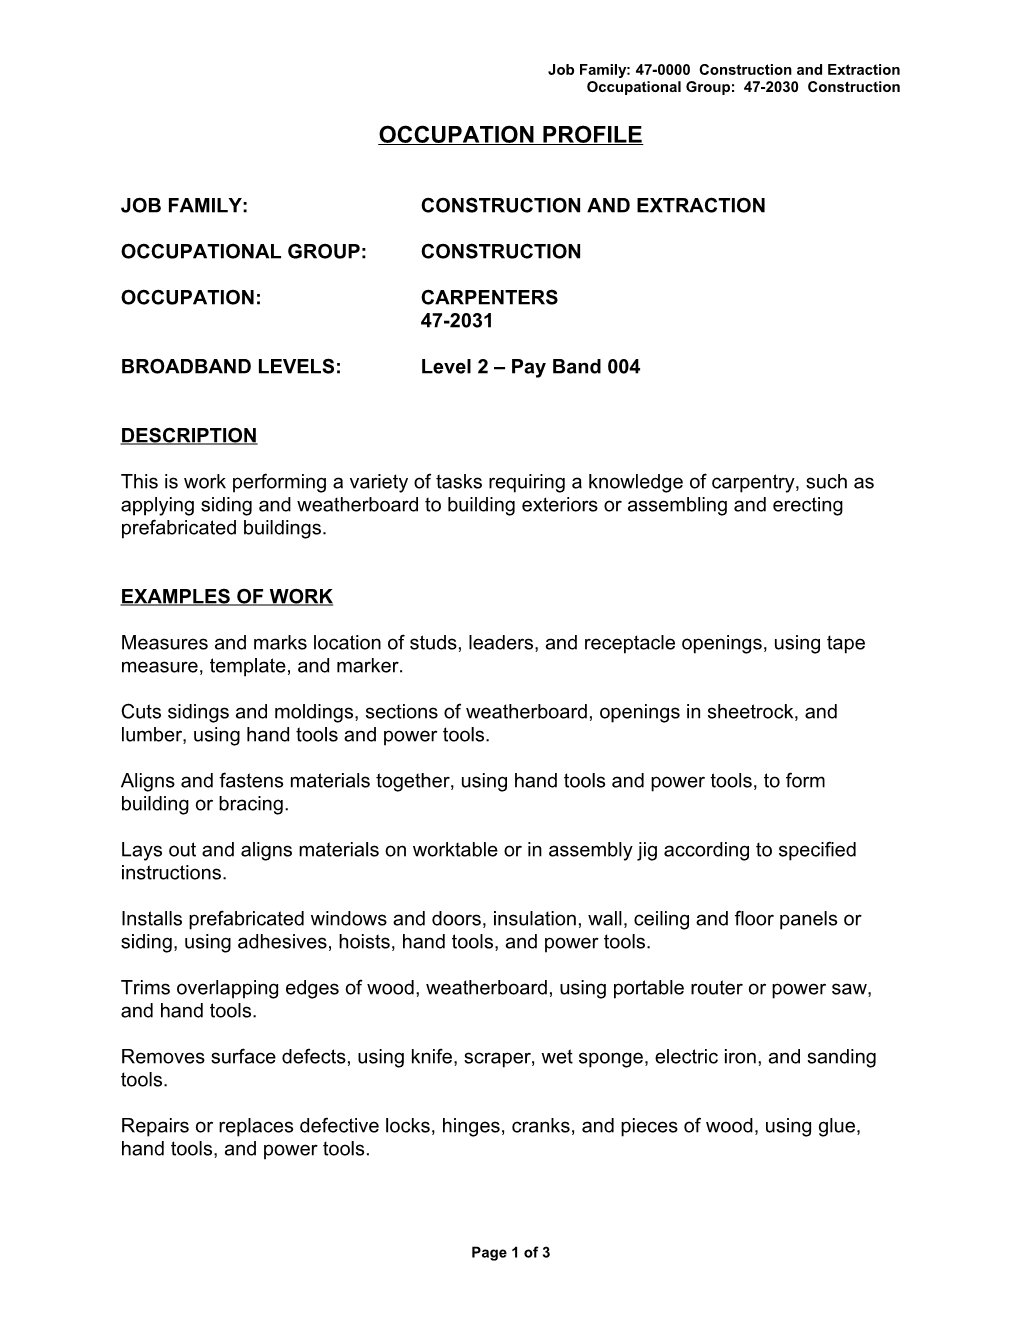 Job Family: 47-0000 Construction and Extraction s1